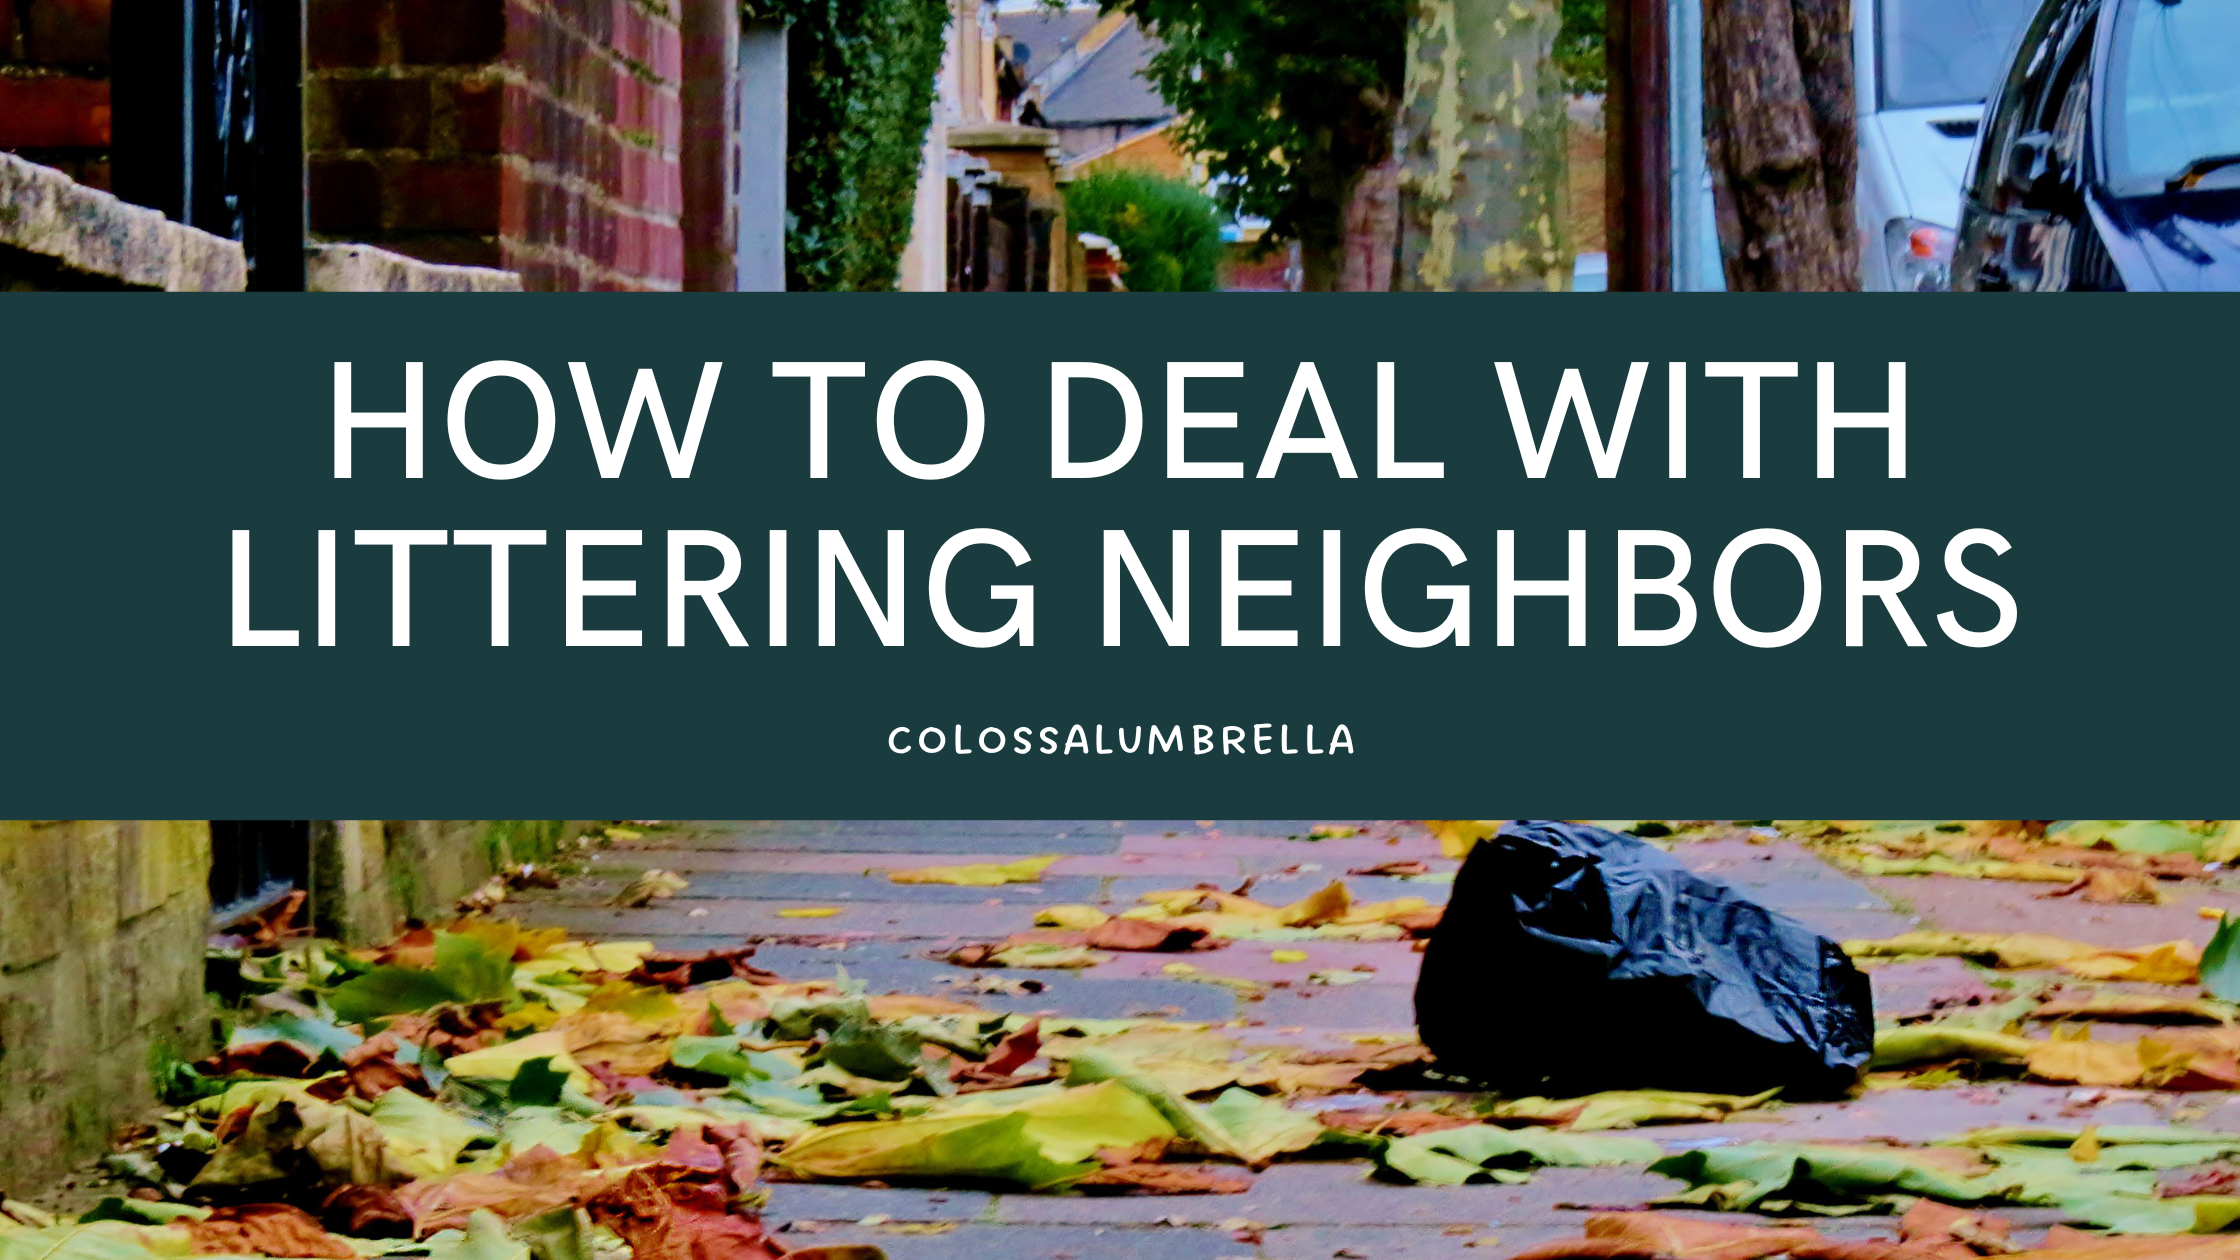 How to Deal With Littering Neighbors: 5 Easy Ways To Handle It